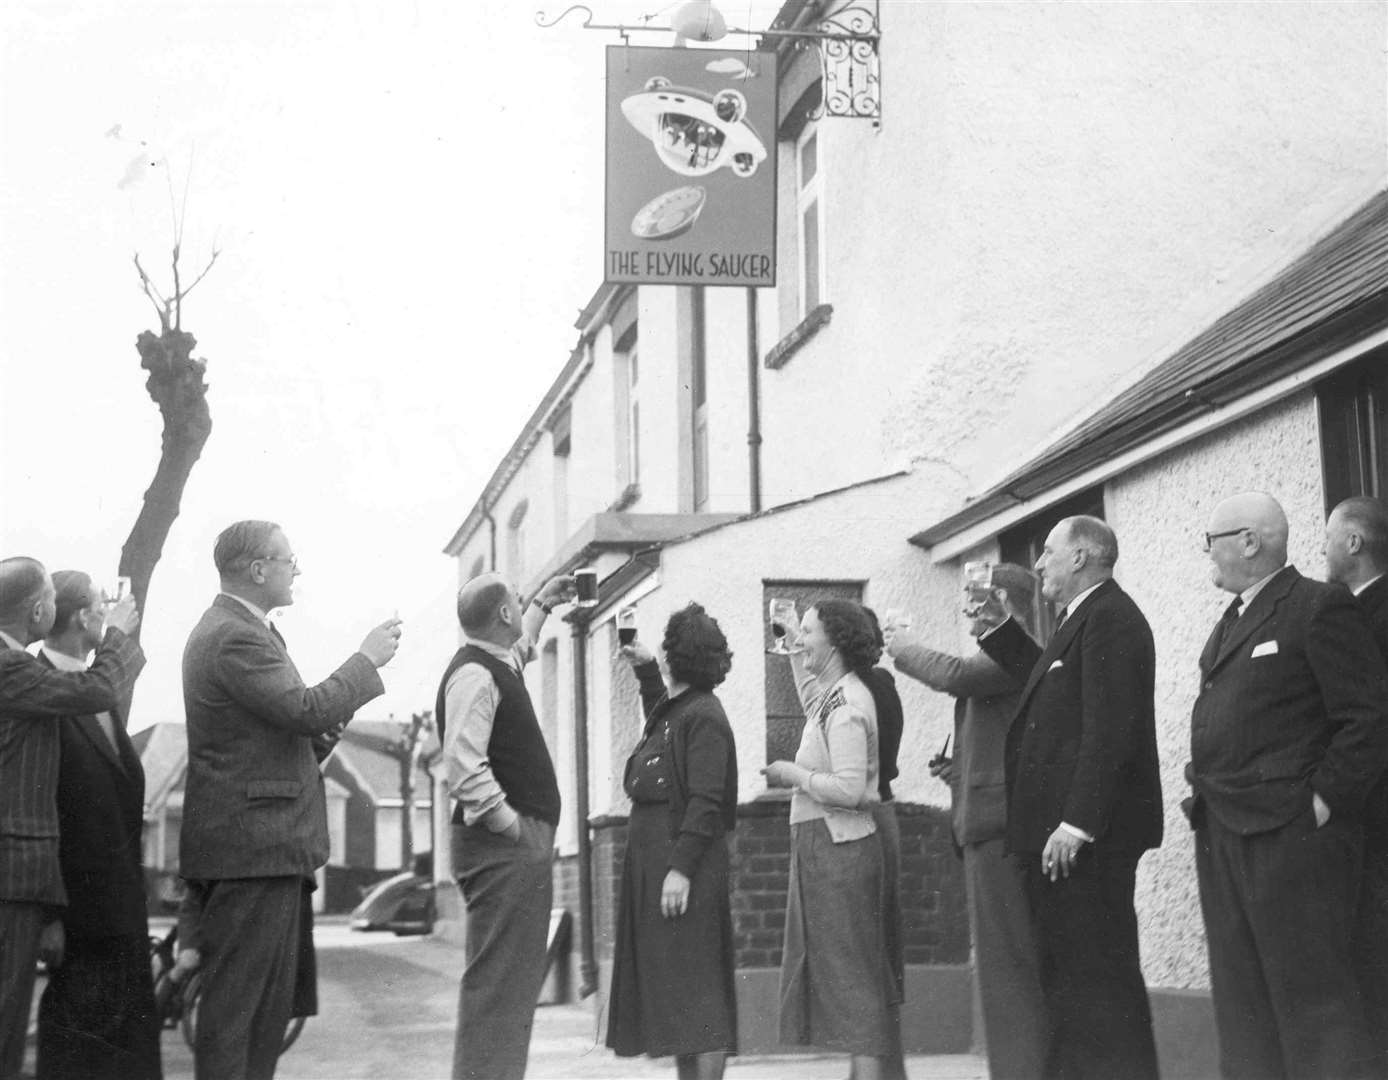 The Flying Saucer public house in Hempstead opening ceremony in April 1951. Picture: Images of Medway